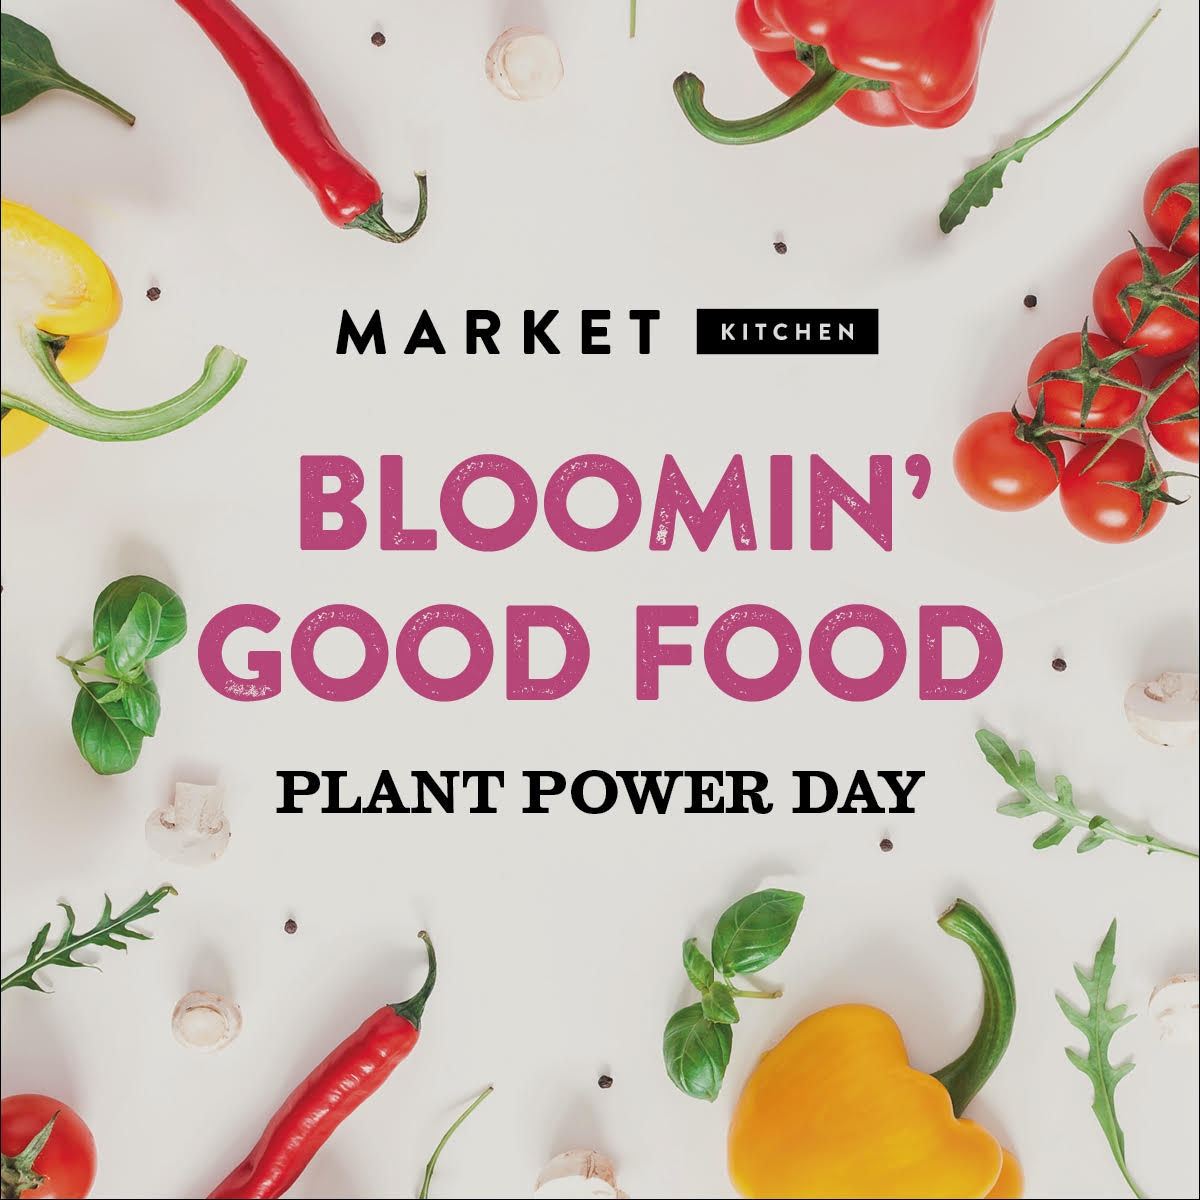 Heard about Superfood Salads and desperate to try one? We're celebrating Plant Power Day with plant-based meals – all in one of our scrummy bowls. #PlantPowerDay #PokeBowl #Hawaiian #Healthy #Dine #Delicious #Food